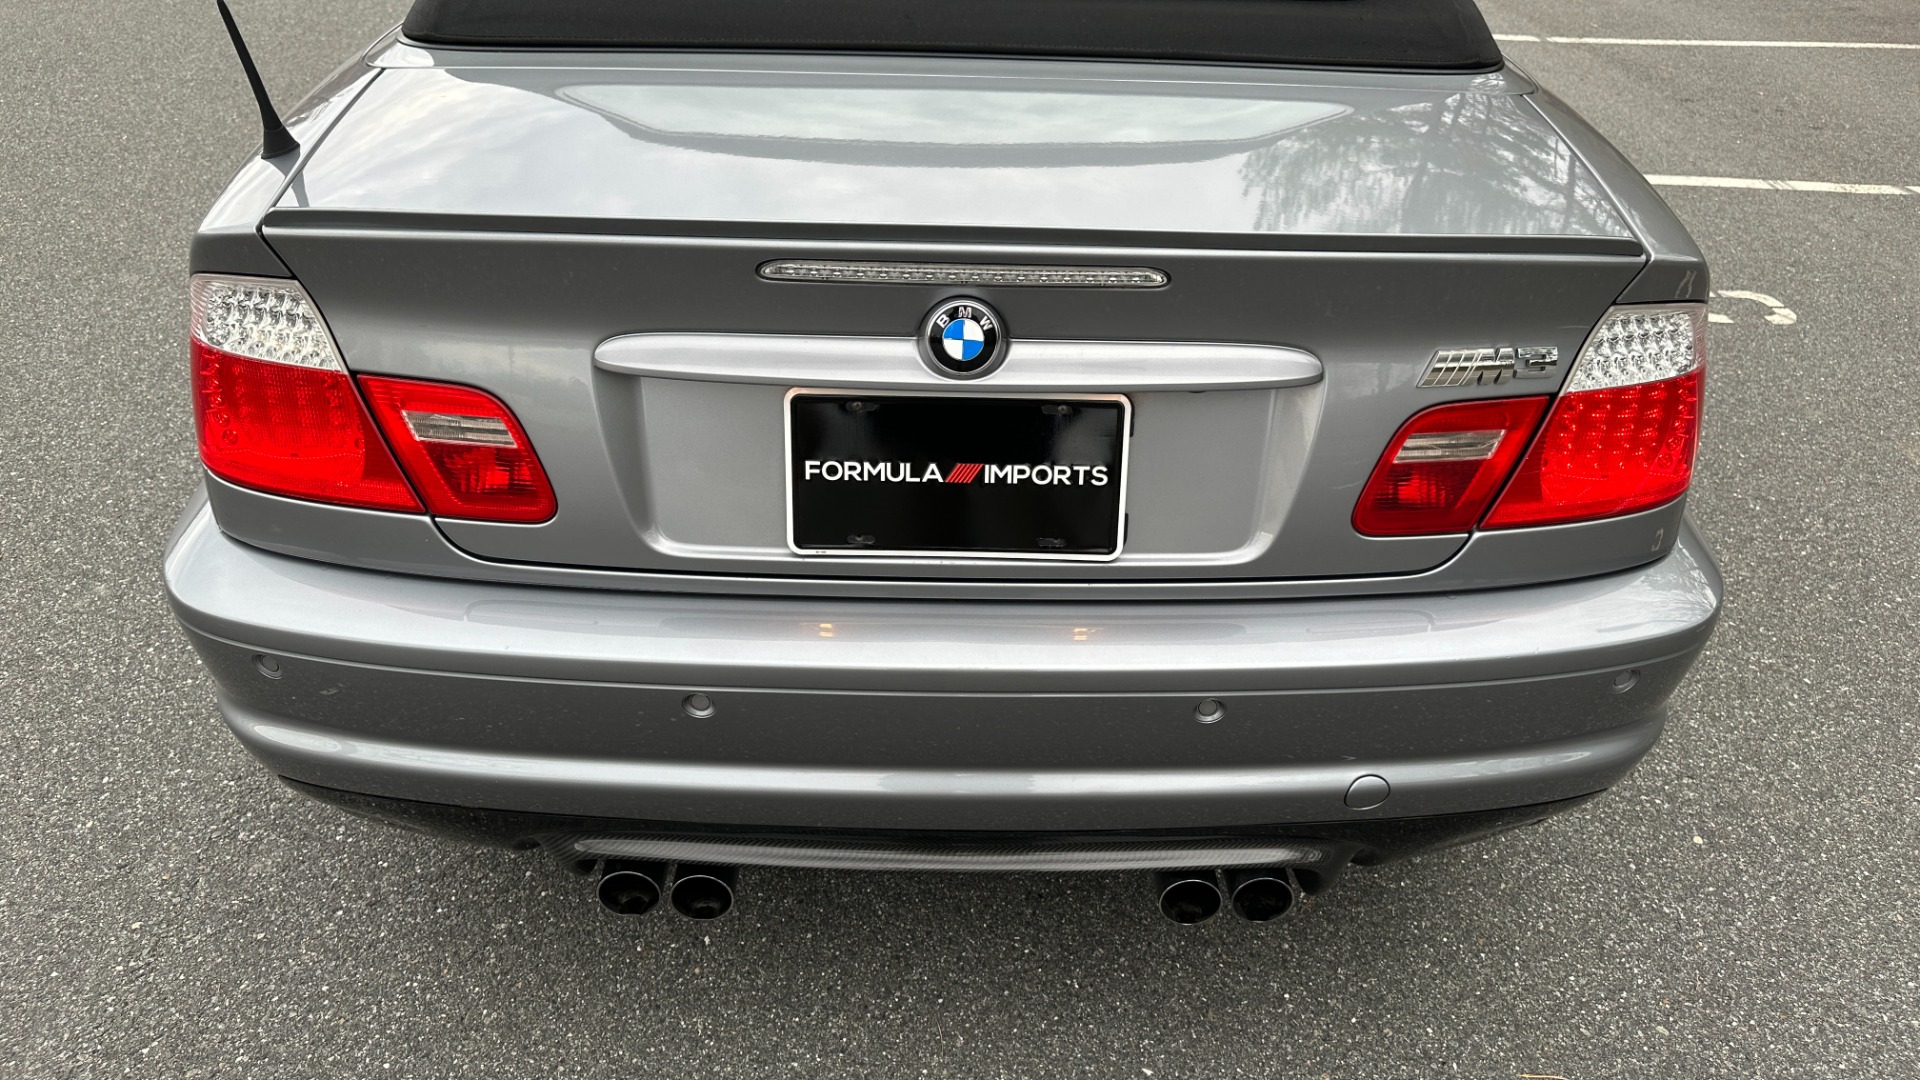 Used 2006 BMW 3 Series M3 CONVERTIBLE / SMG AUTO / LEATHER / INLINE 6CYL / CARBON FIBER for sale Sold at Formula Imports in Charlotte NC 28227 44